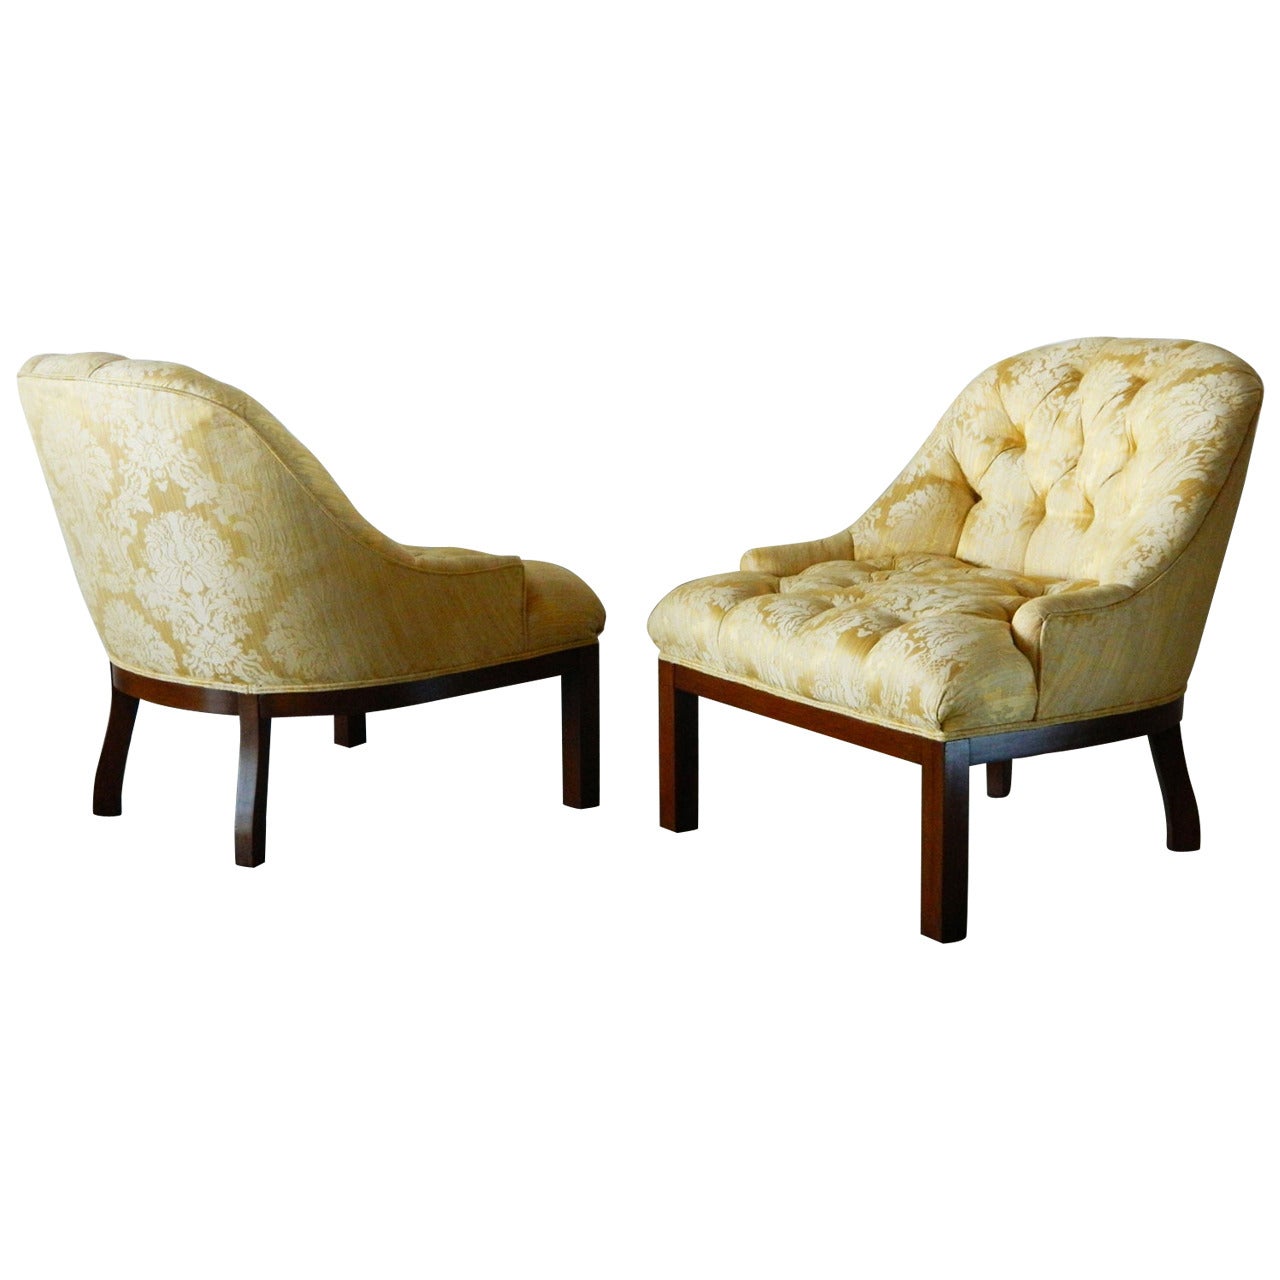 American Modern Tufted Slipper Chairs in the Style of Edward Wormley For Sale